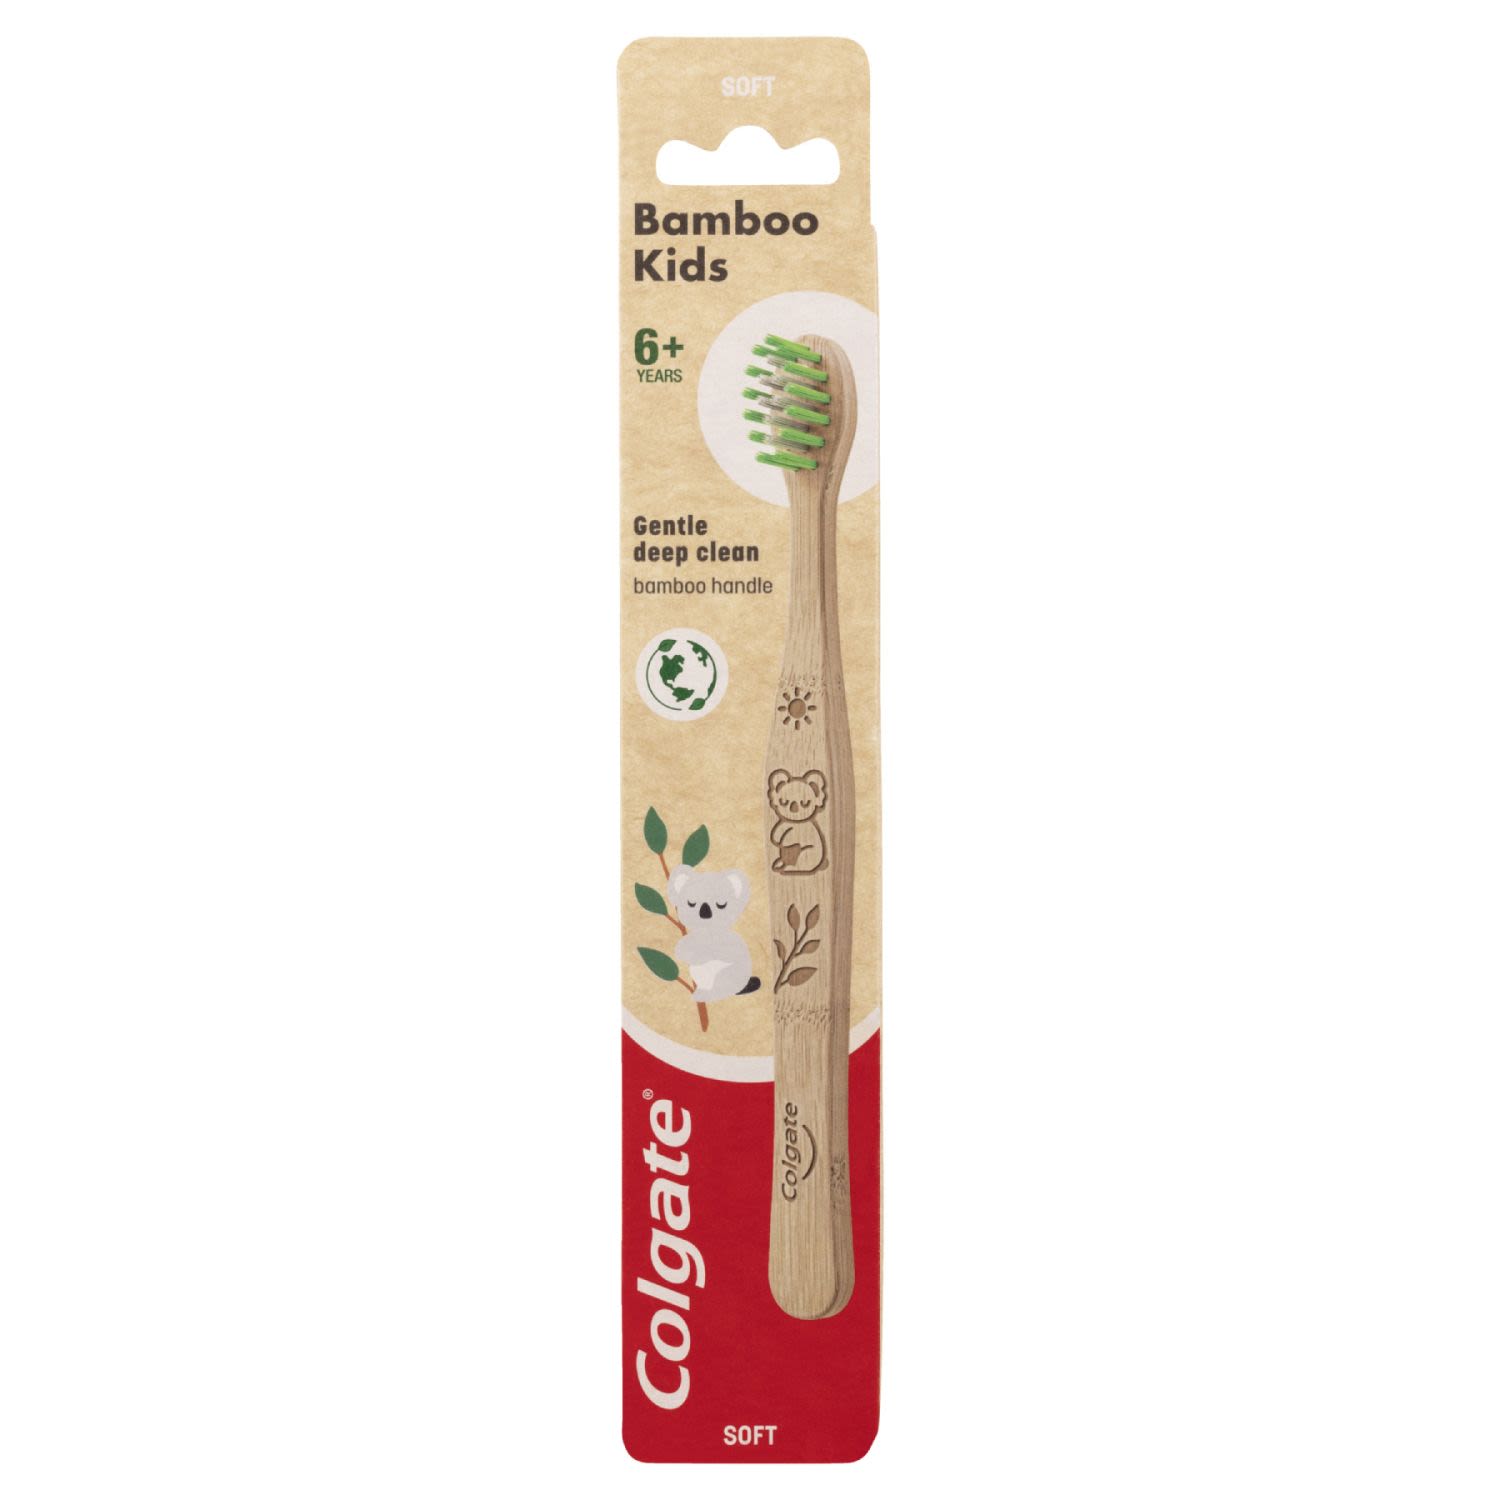 Colgate Kids Bamboo Manual Toothbrush Soft Bristles for Children 6+ Years, 1 Each